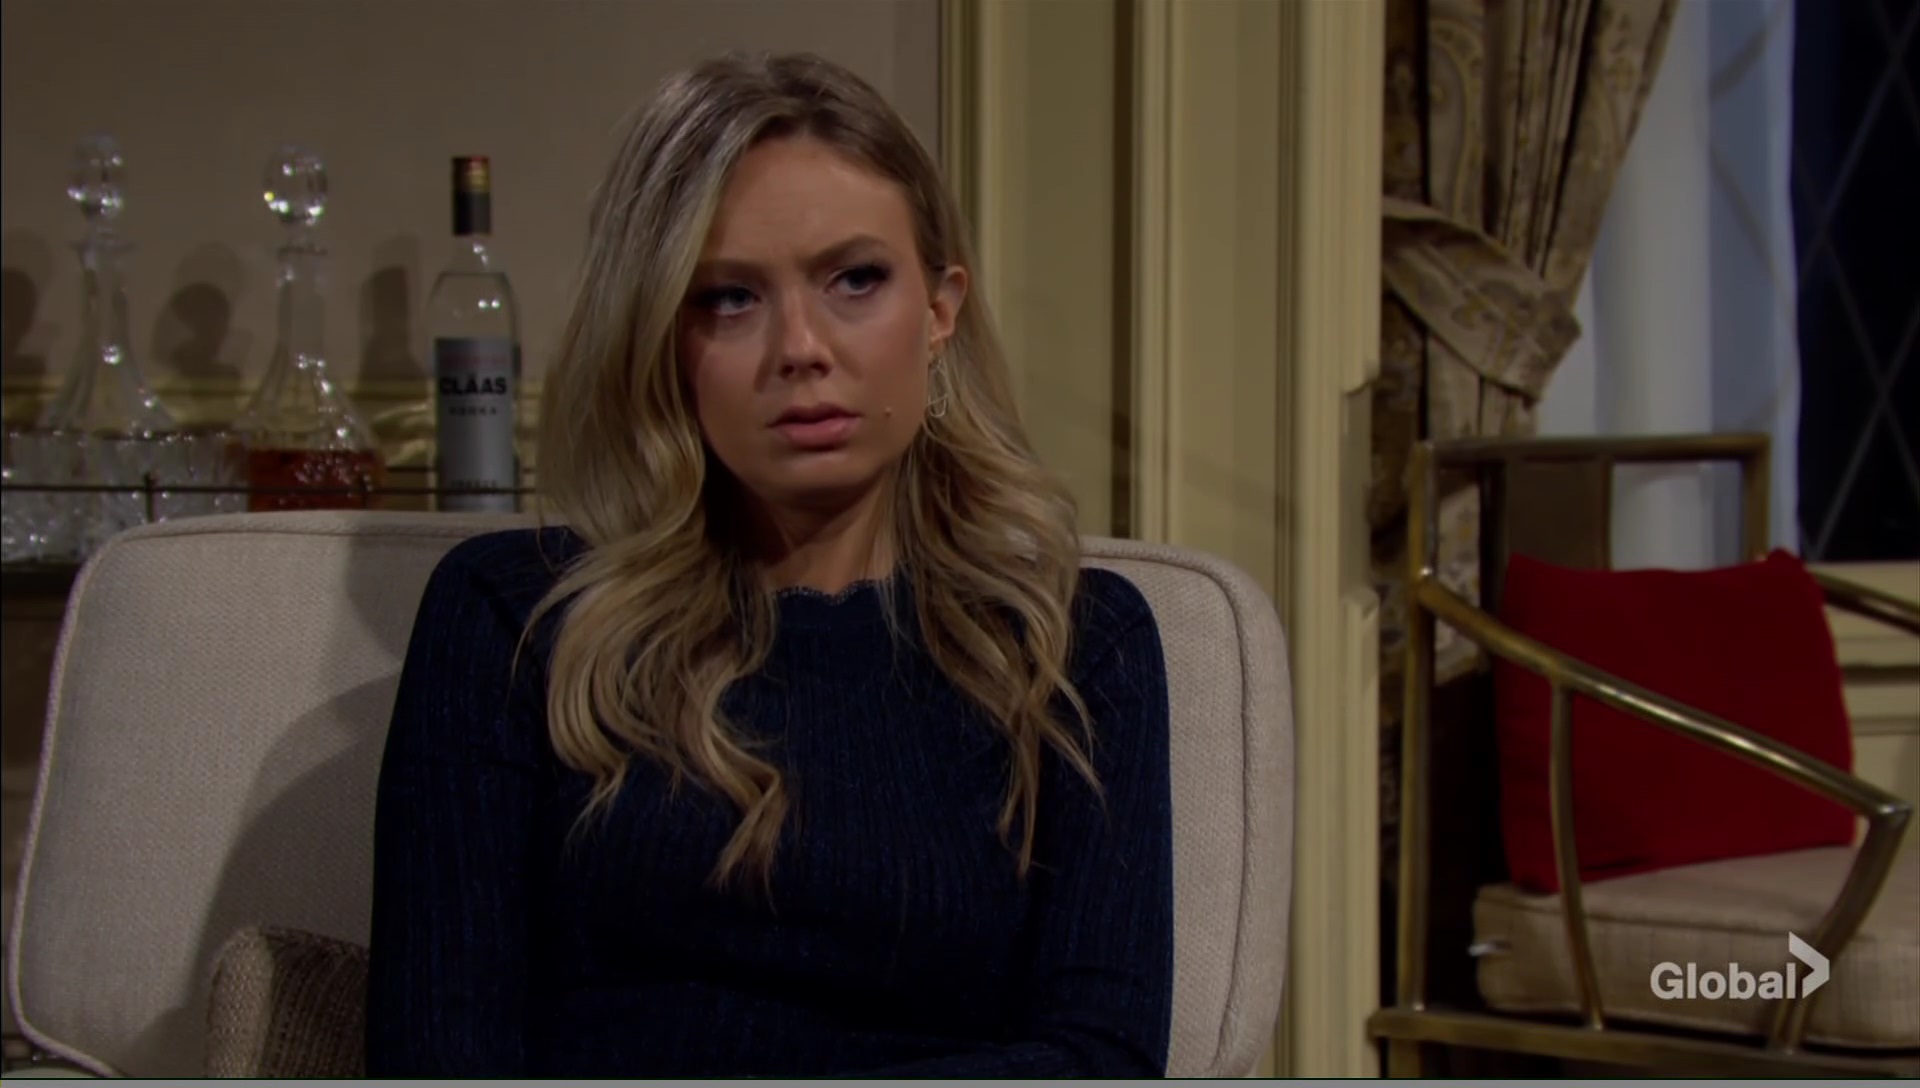 abby petulant young restless cbs